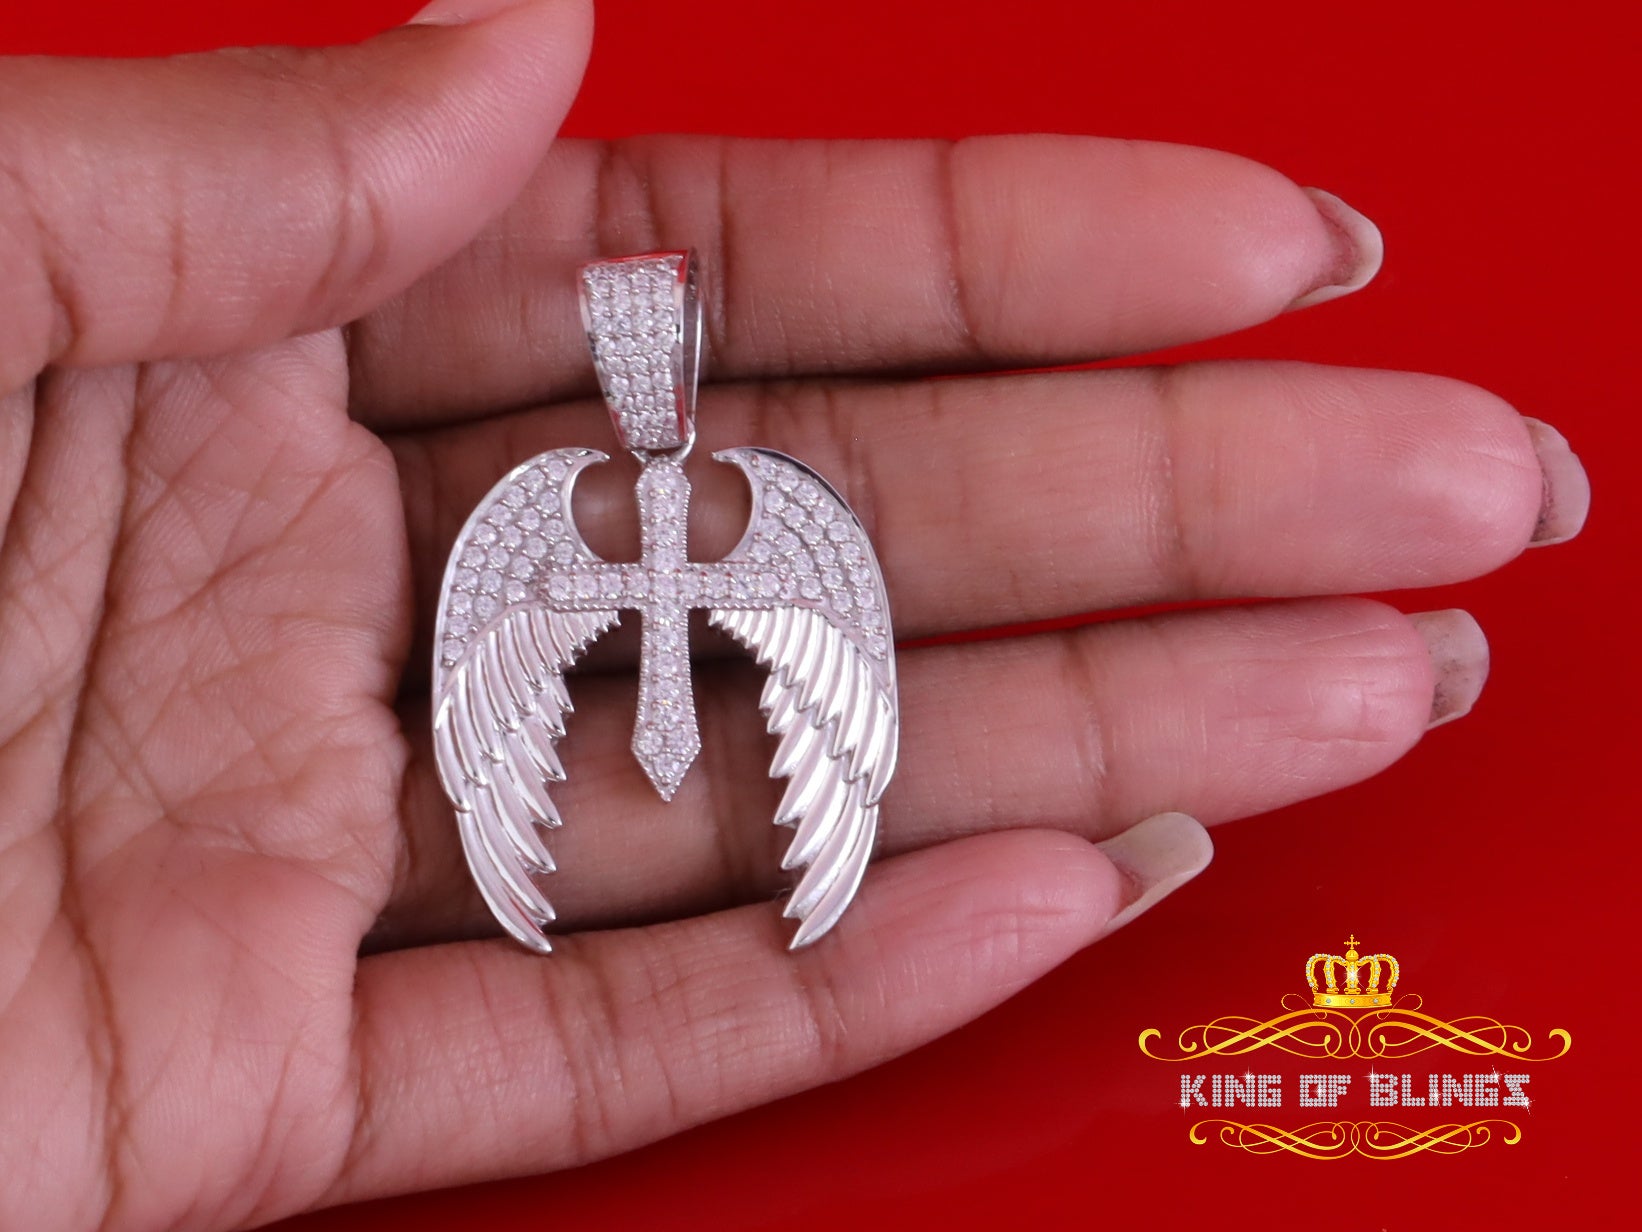 King Of Bling's White Silver Small 1.50ct Cubic Zirconia 925 Sterling Pendant Cross Angel Wing KING OF BLINGS